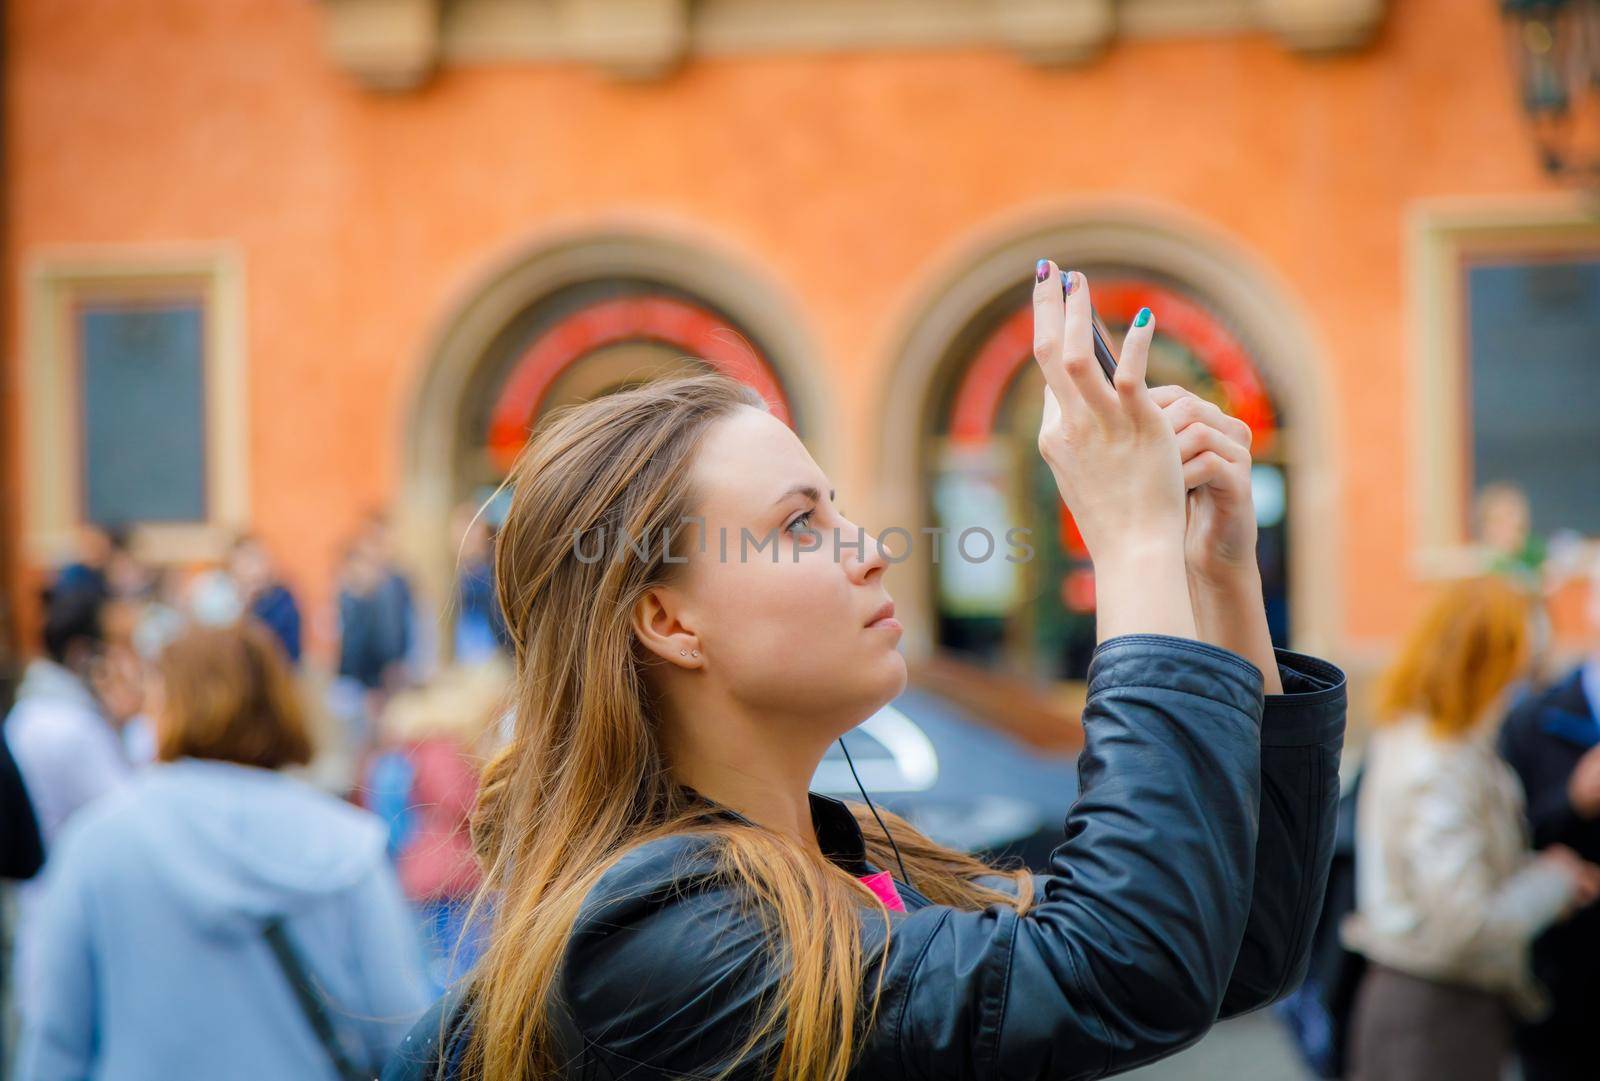 A young girl travels and takes pictures of the sights of the city on the phone.